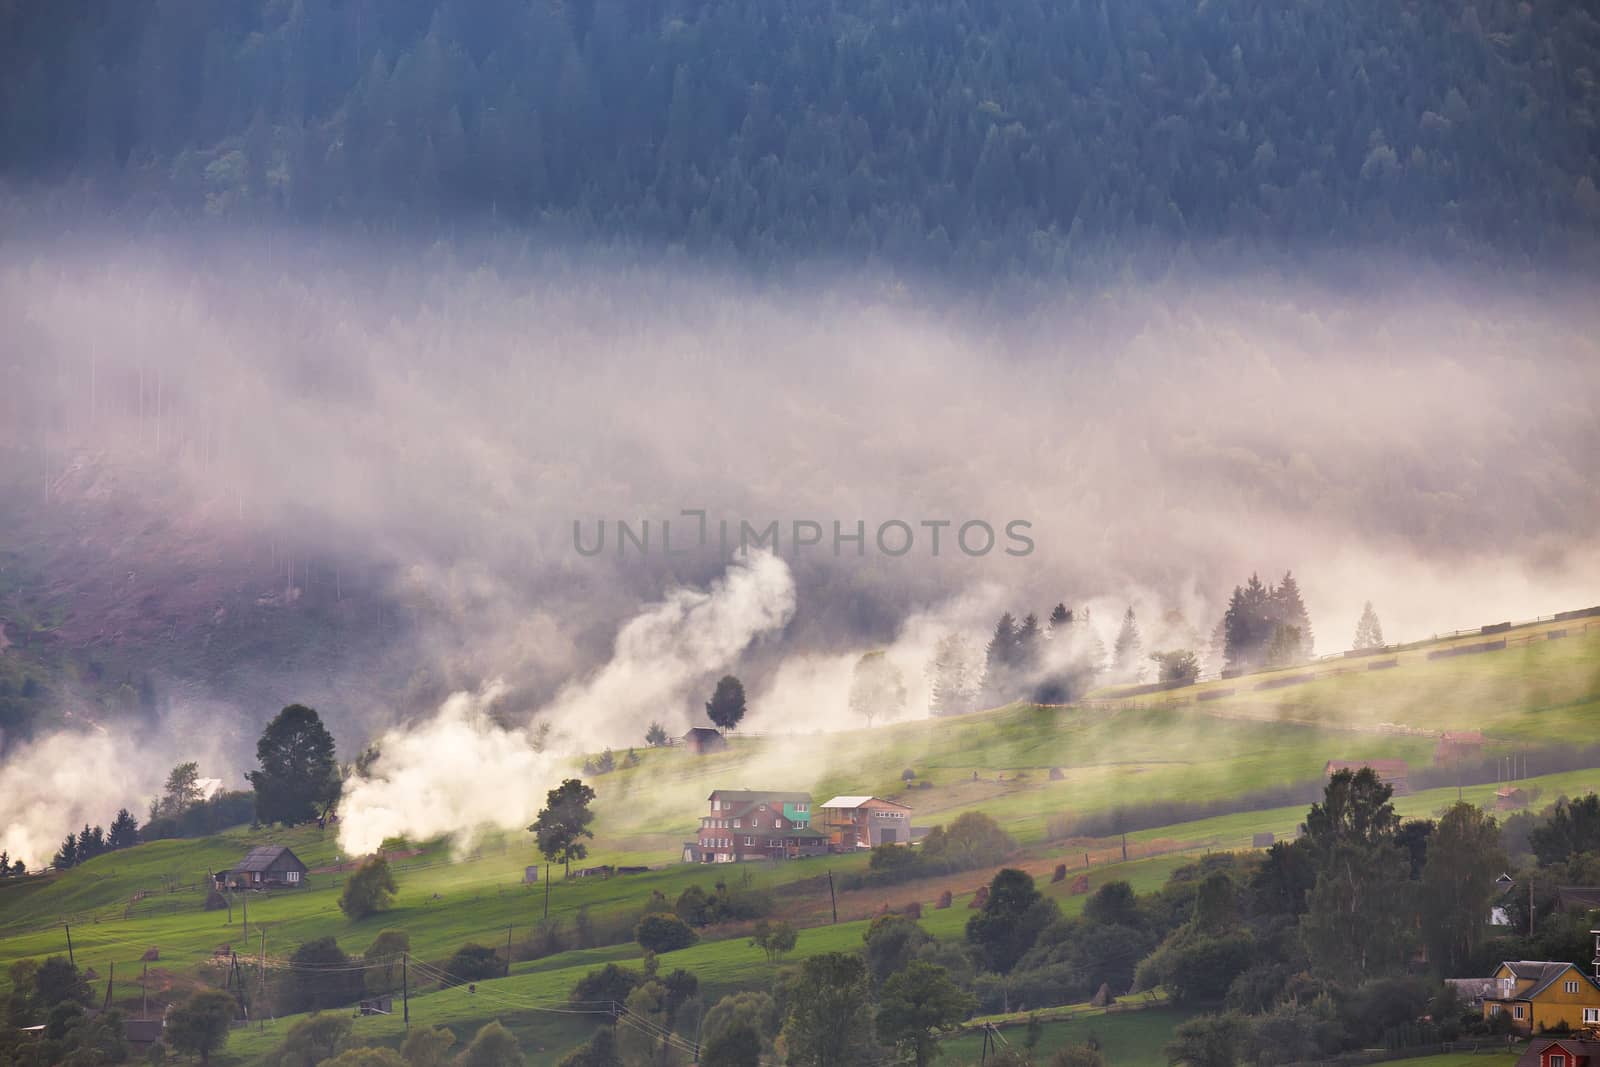 Alpine village in mountains. Smoke, bonfire and haze over hills by weise_maxim